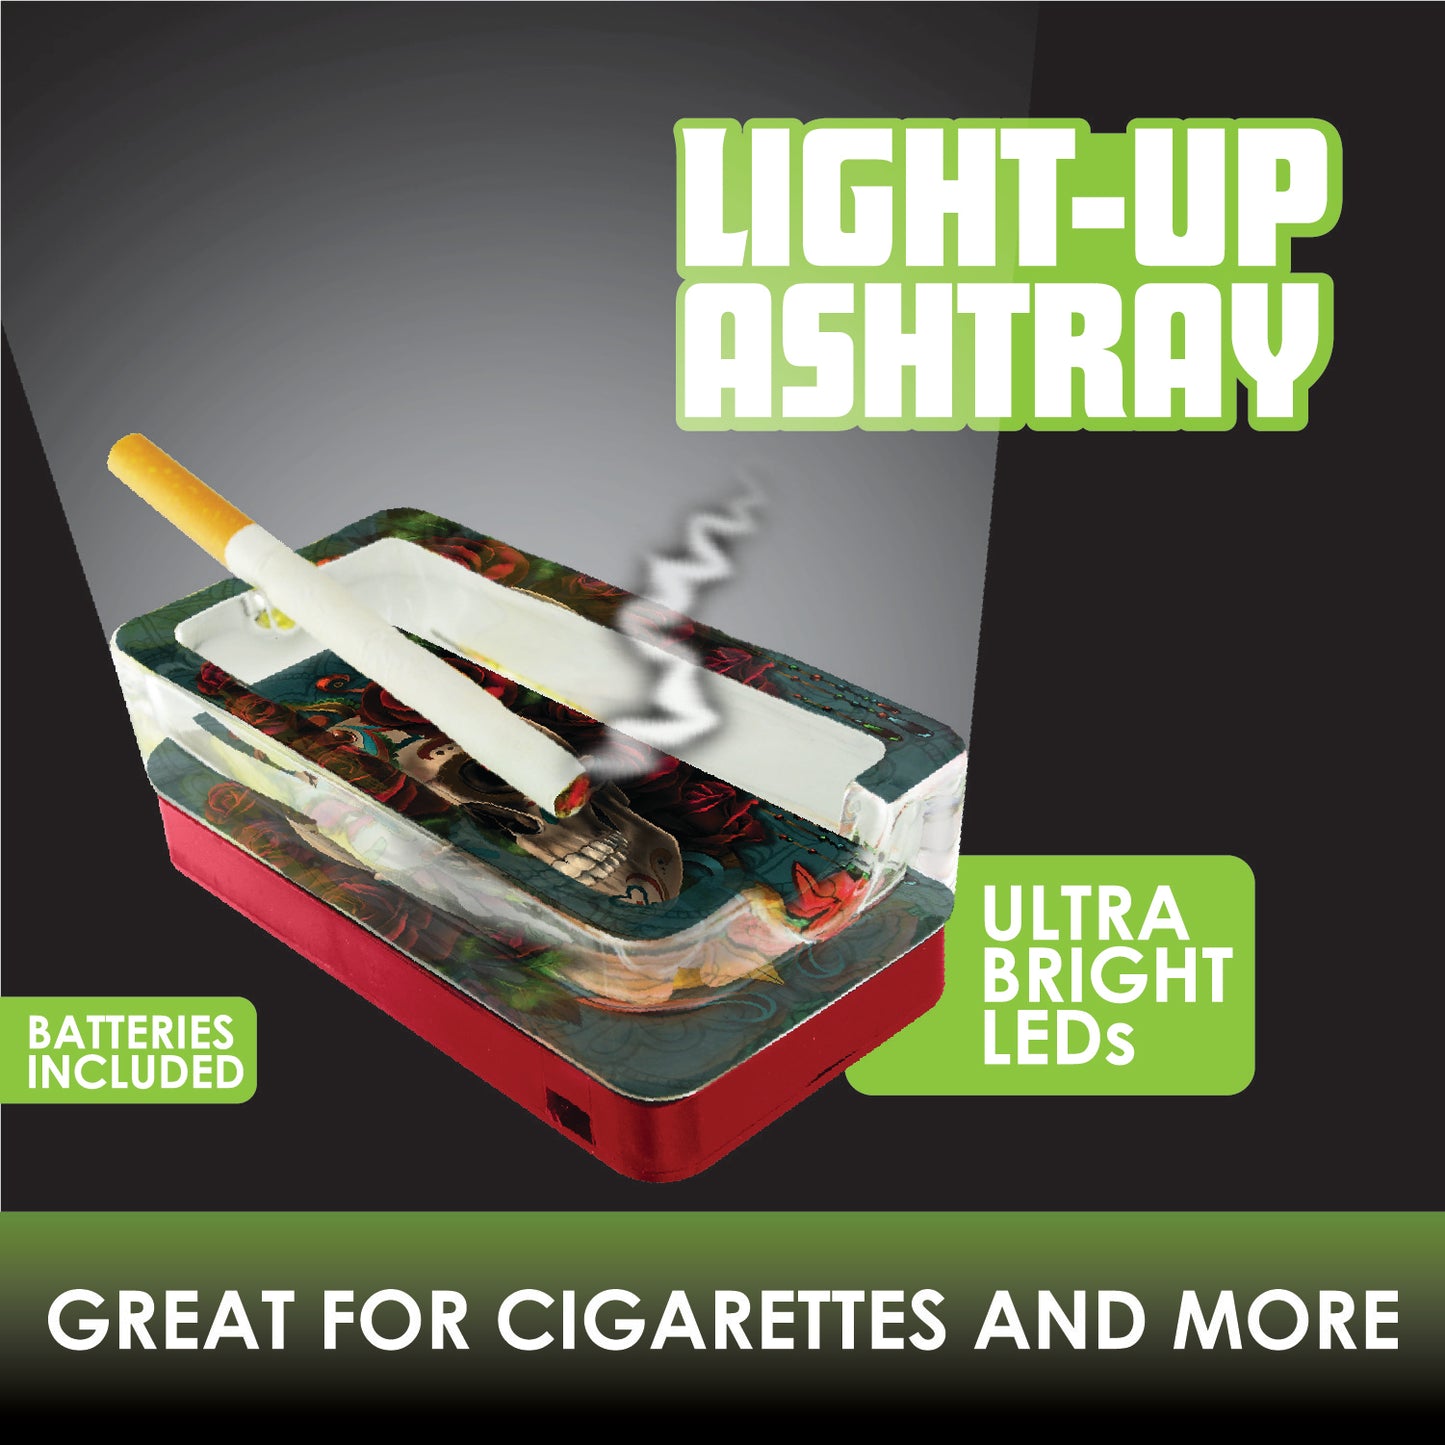 ITEM NUMBER 021756 LIGHT UP ASHTRAY E 6 PIECES PER DISPLAY